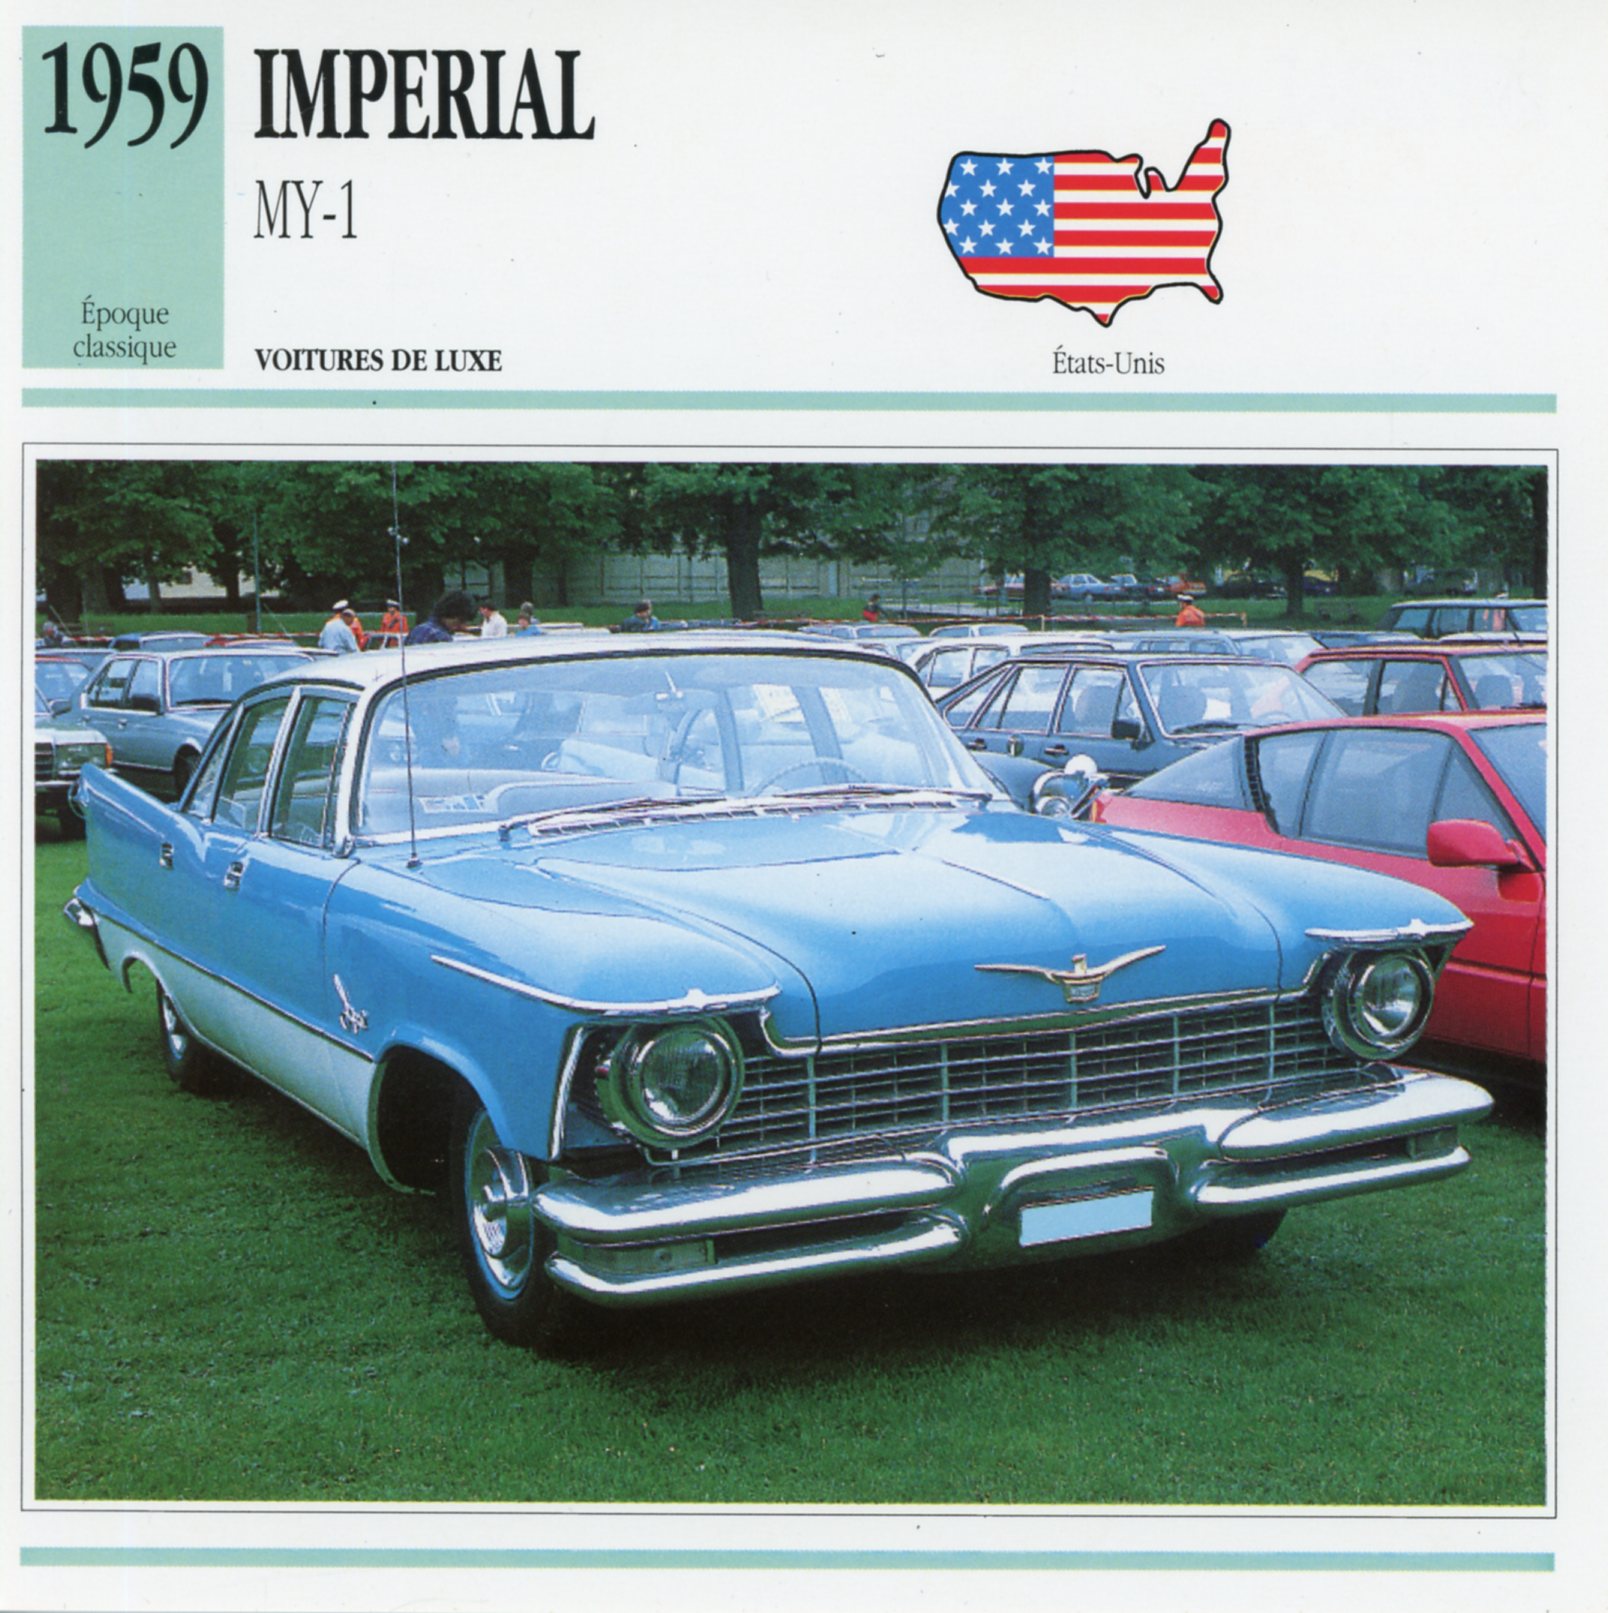 FICHE-AUTO-IMPERIAL-MY1-MY-1959-LEMASTERBROCKERS-CARD-CARS-ATLAS